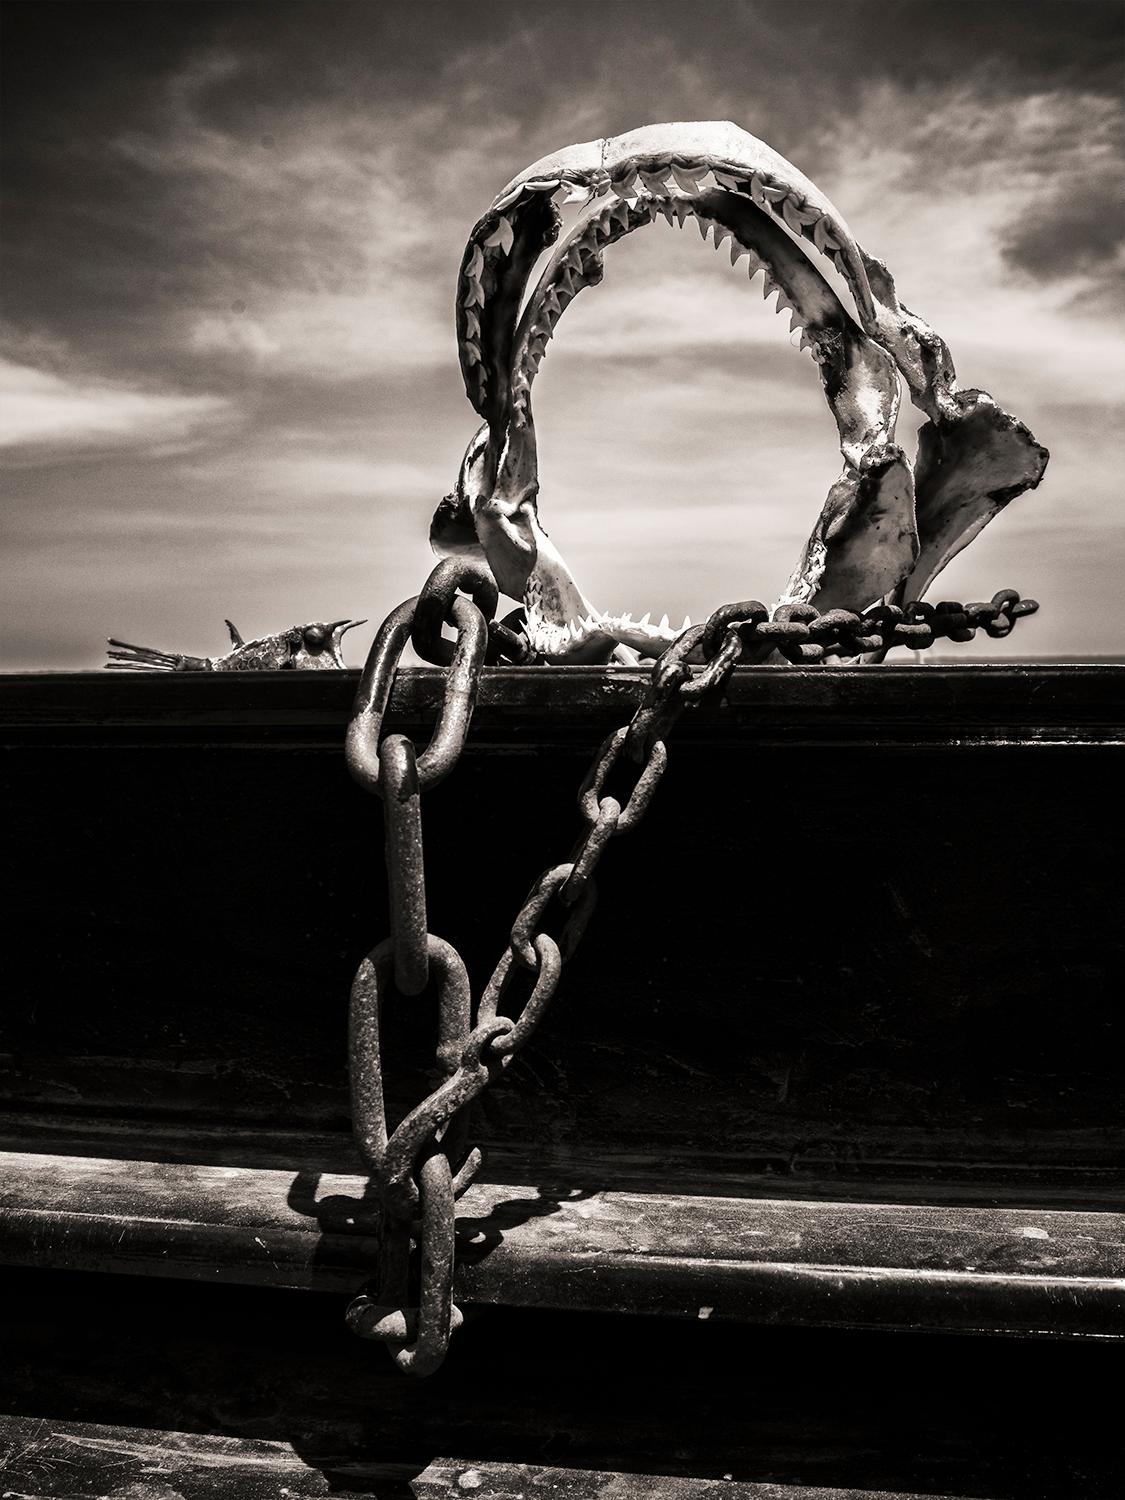 Edition of 25
signed and numbered by the artist

A shark bite is chained to the pier in Lamu.

JJK is a pseudonym for one of the world's most successful photo artists.
In his series "Always in my mind", he depicts history, feelings, scenes and most